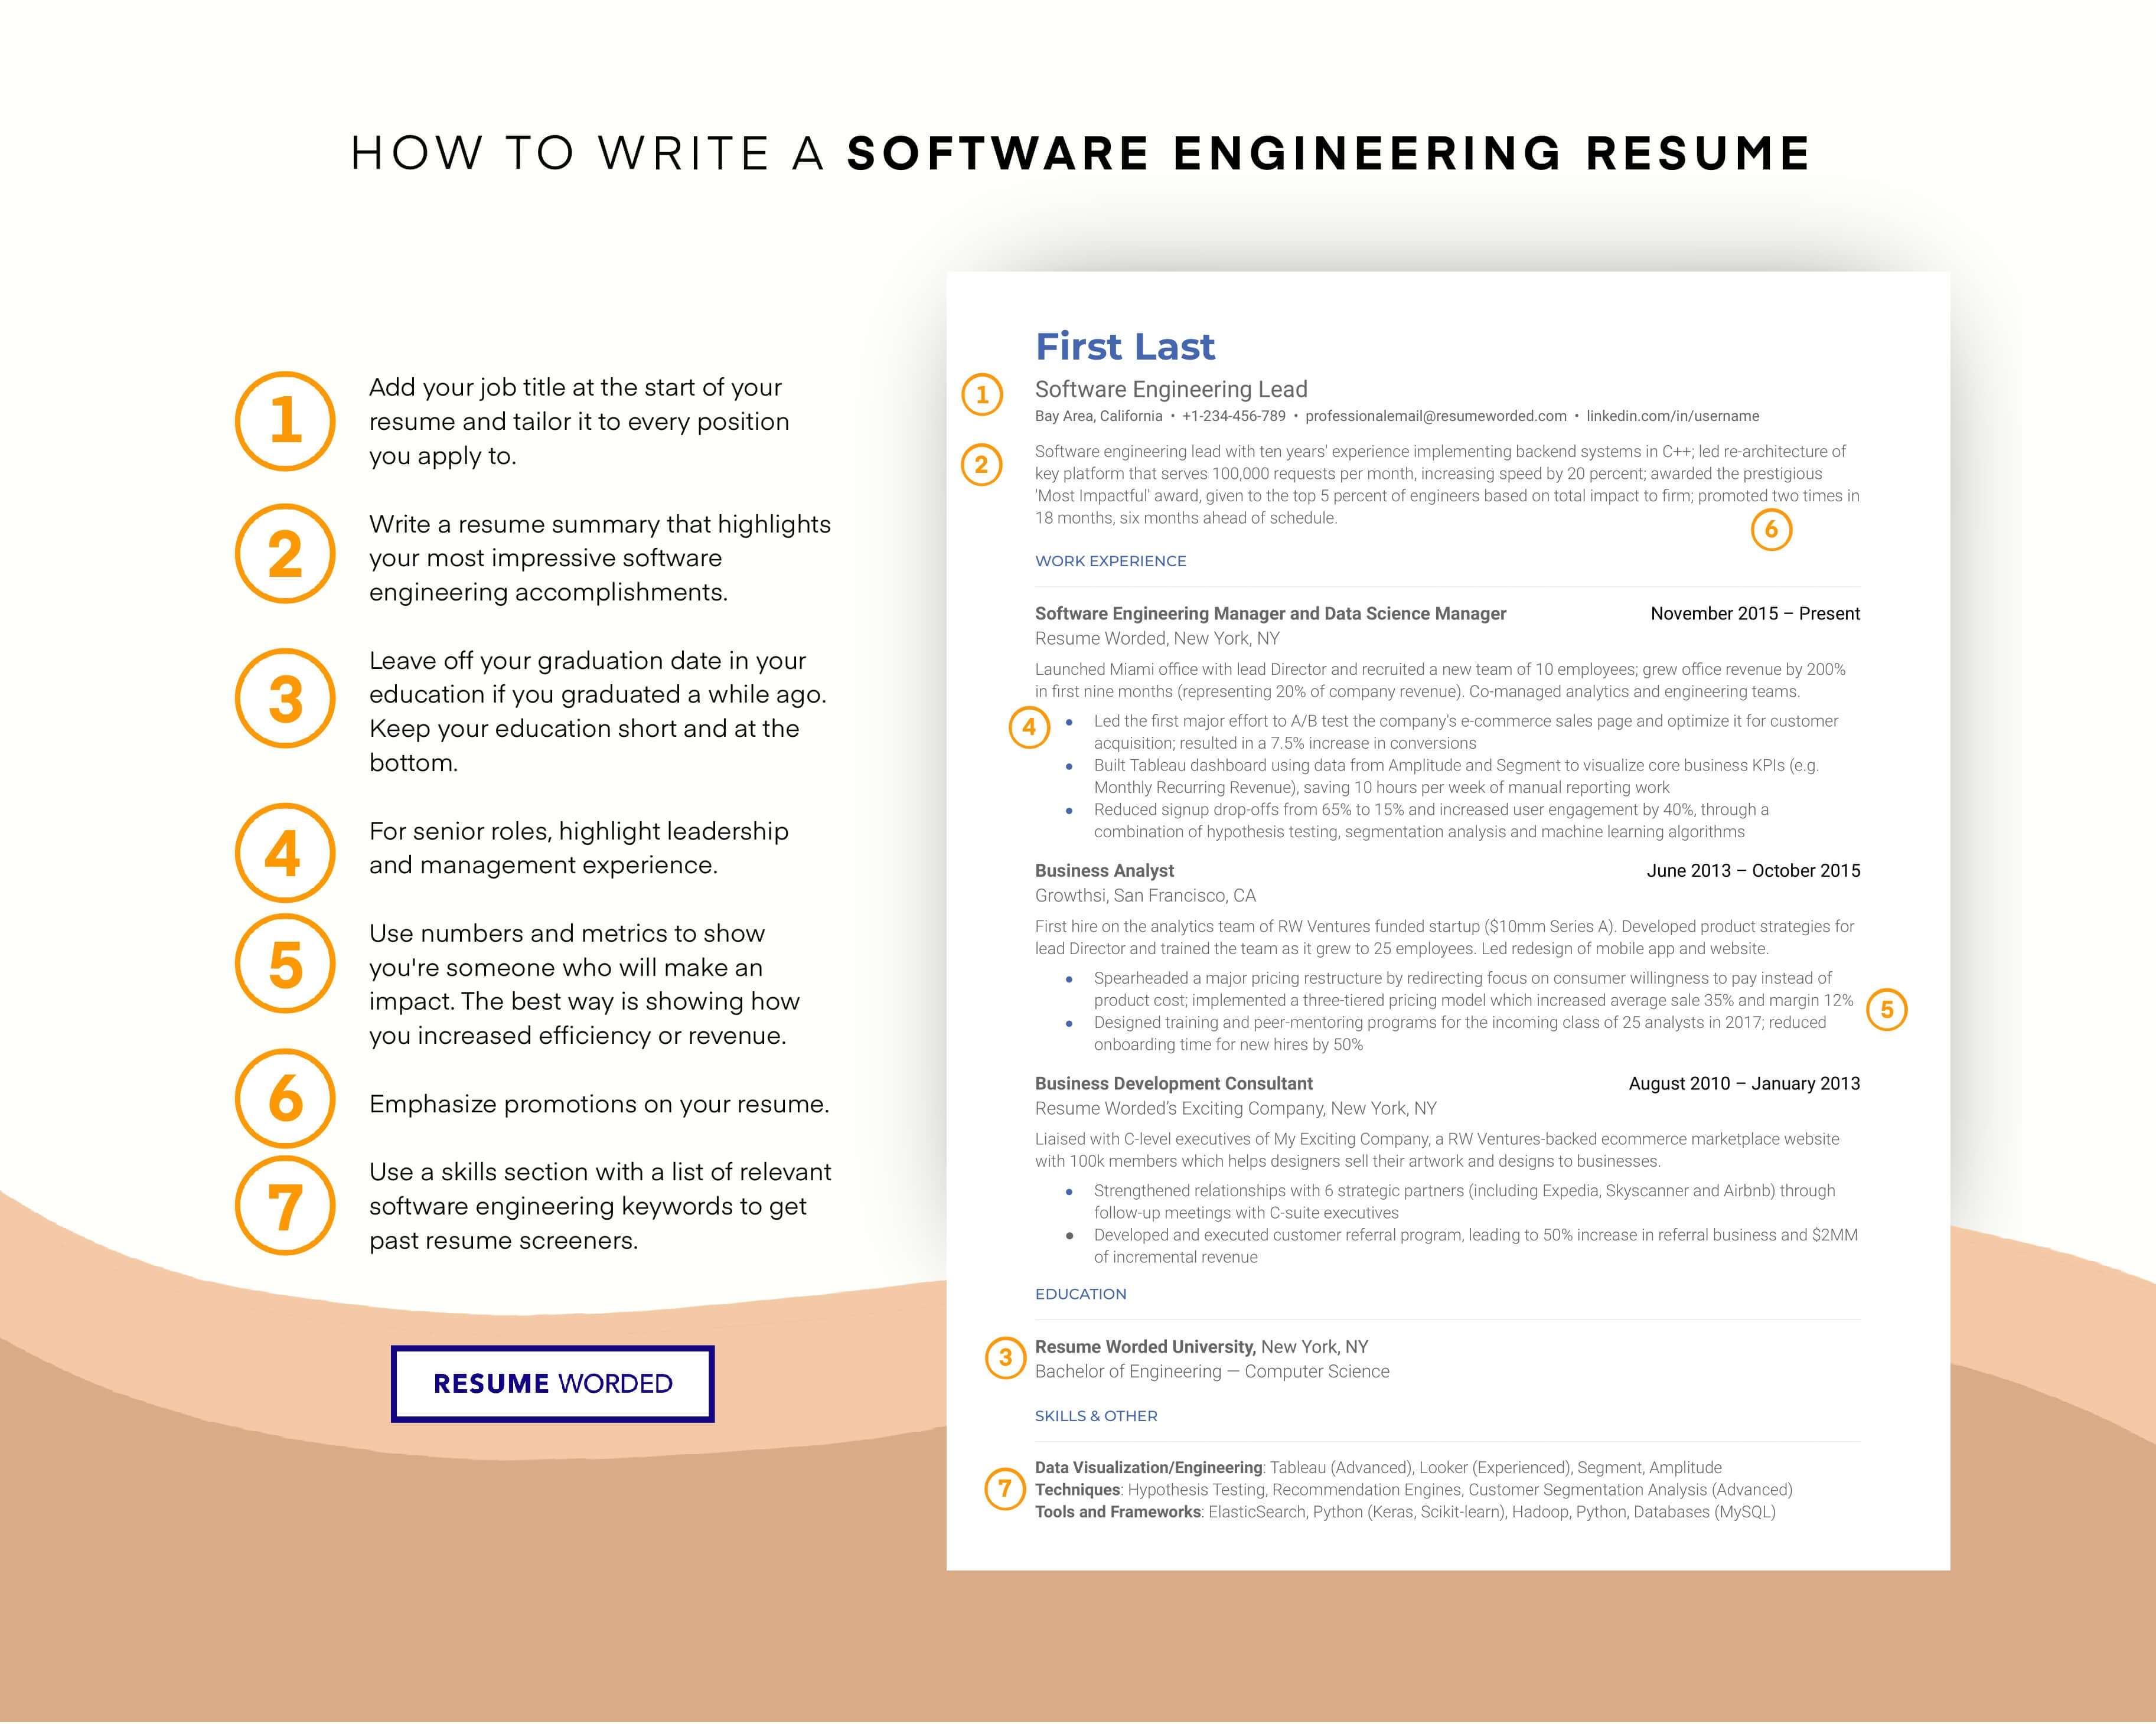 Highlight relevant software proficiency - 3D Game Artist Resume